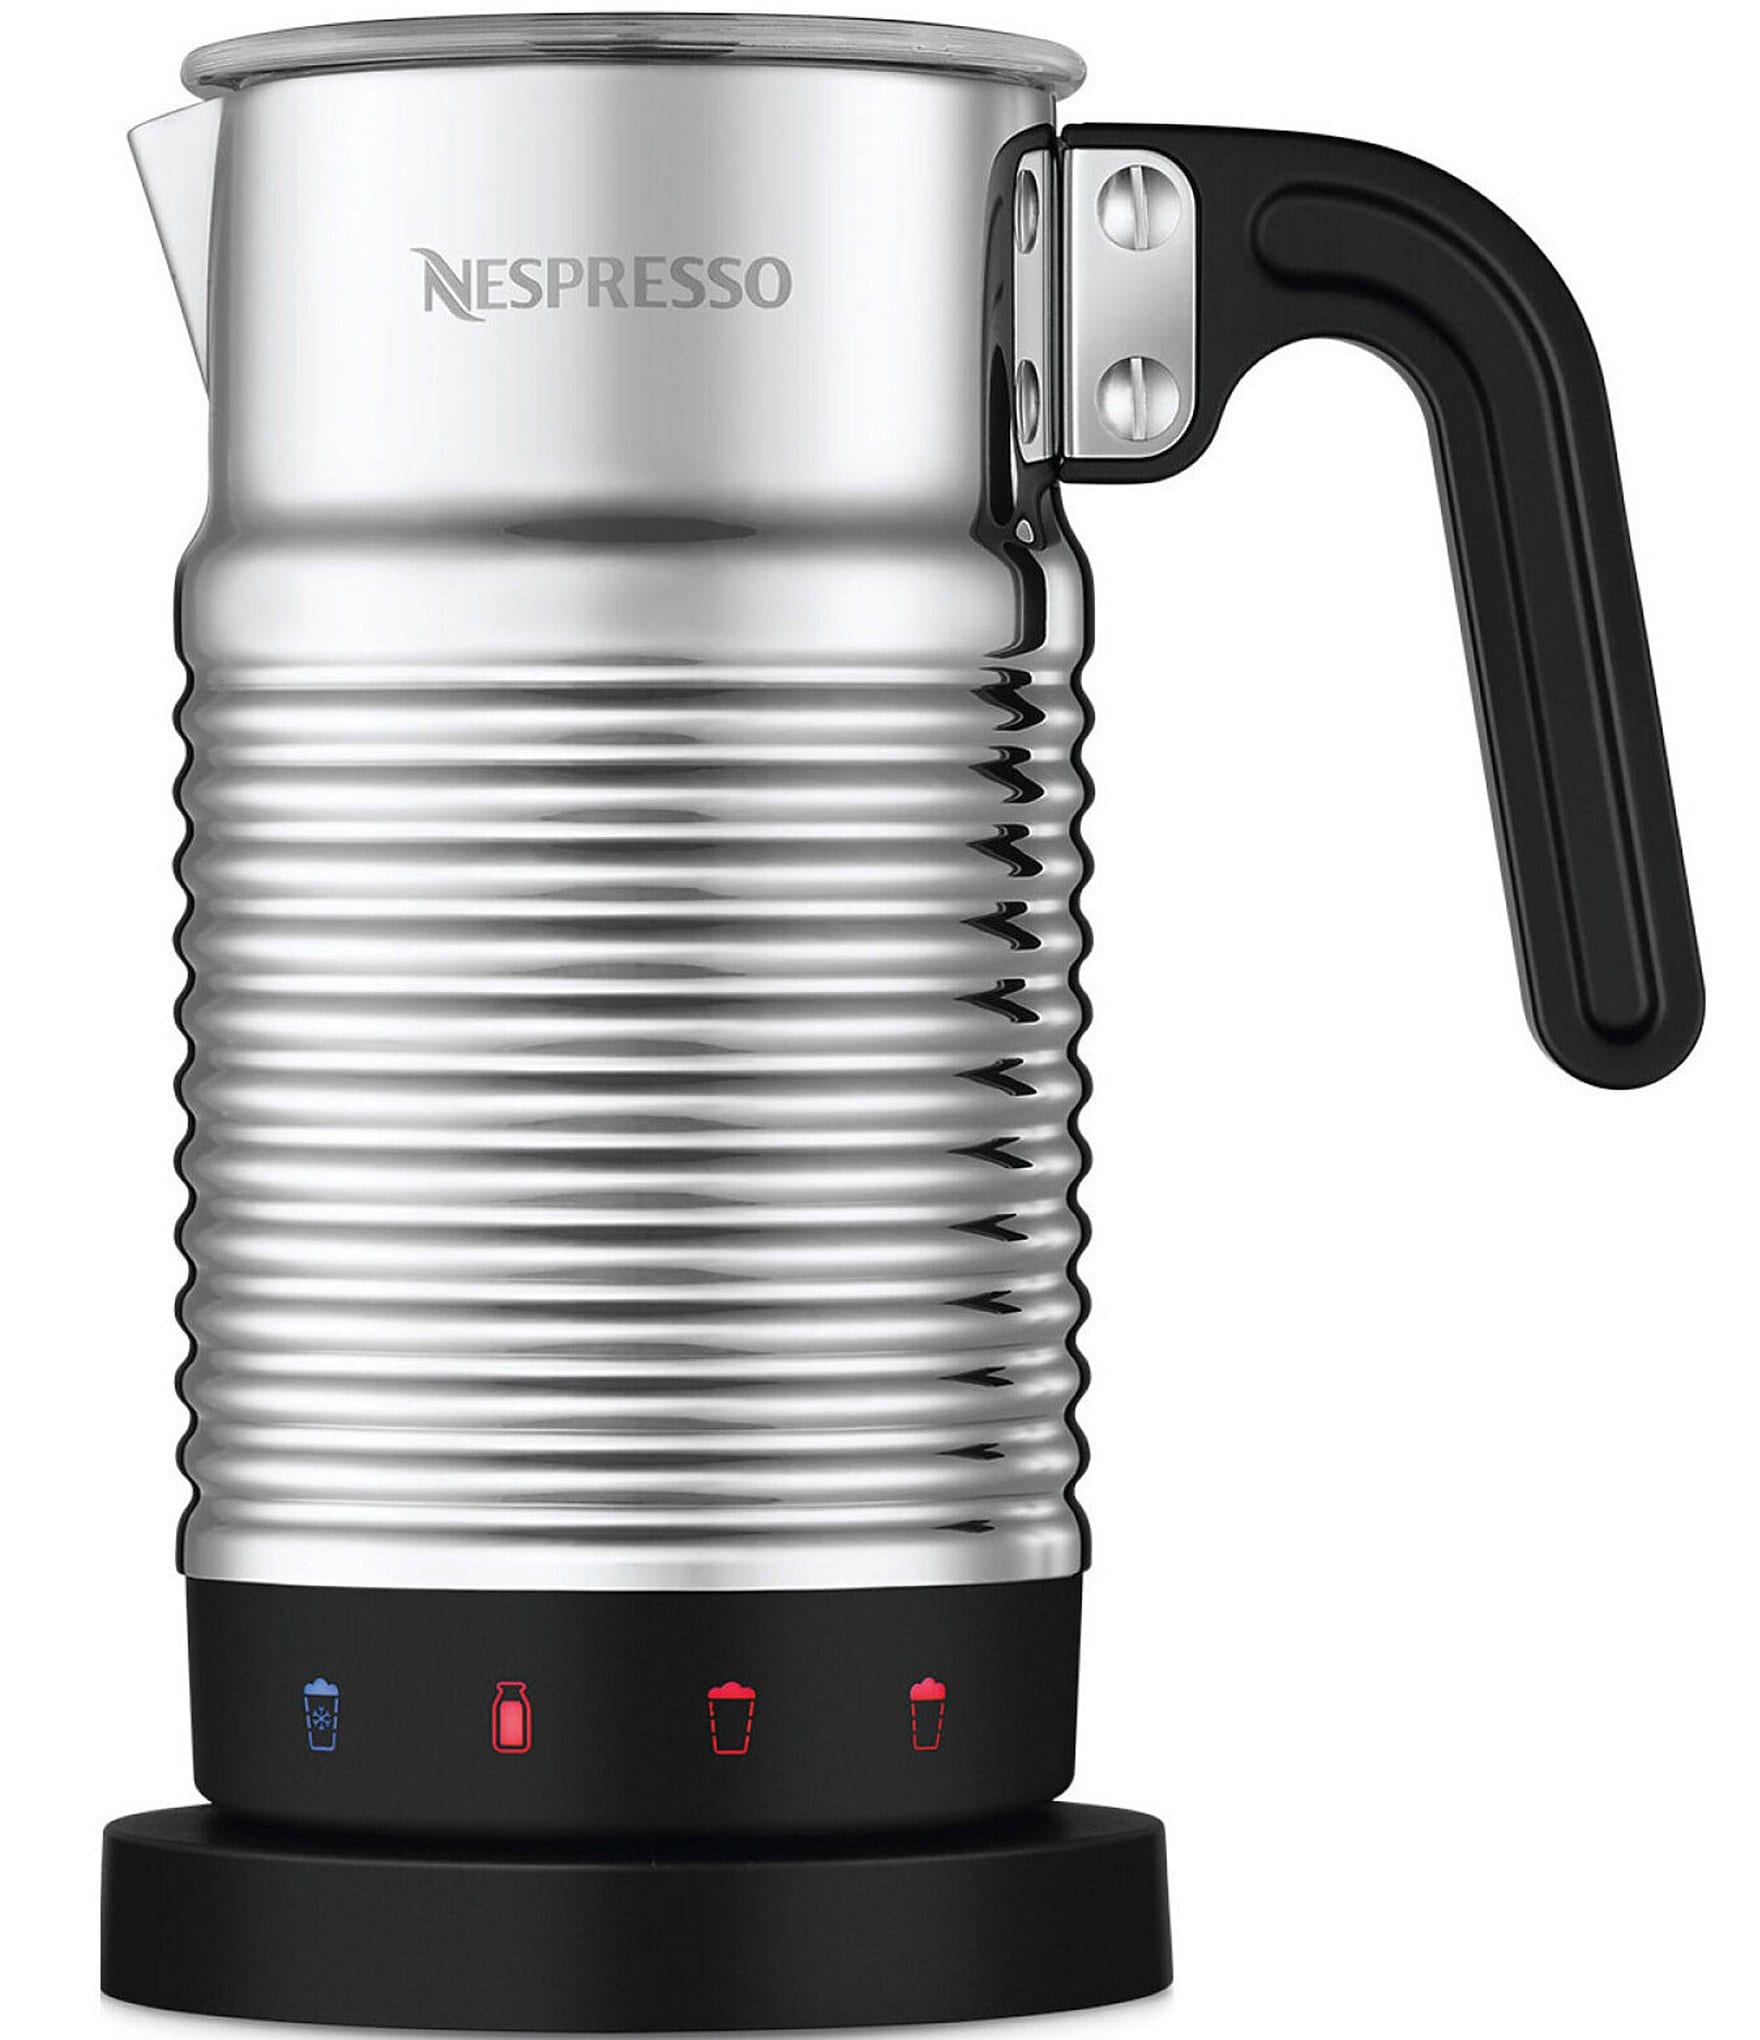 Nespresso milk frother base improvement by Mack77